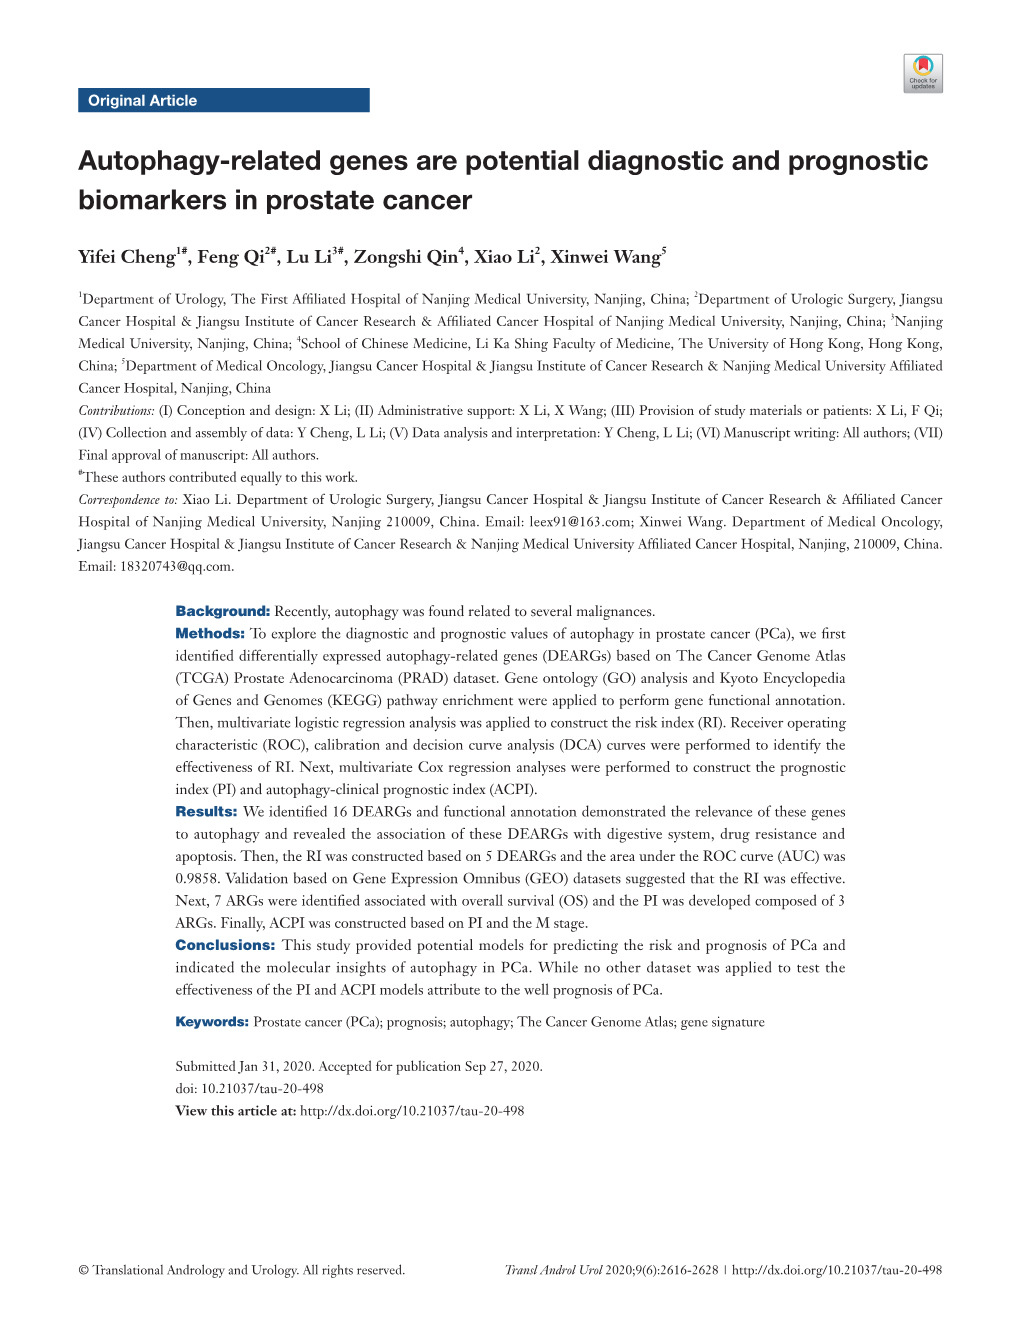 Autophagy-Related Genes Are Potential Diagnostic and Prognostic Biomarkers in Prostate Cancer